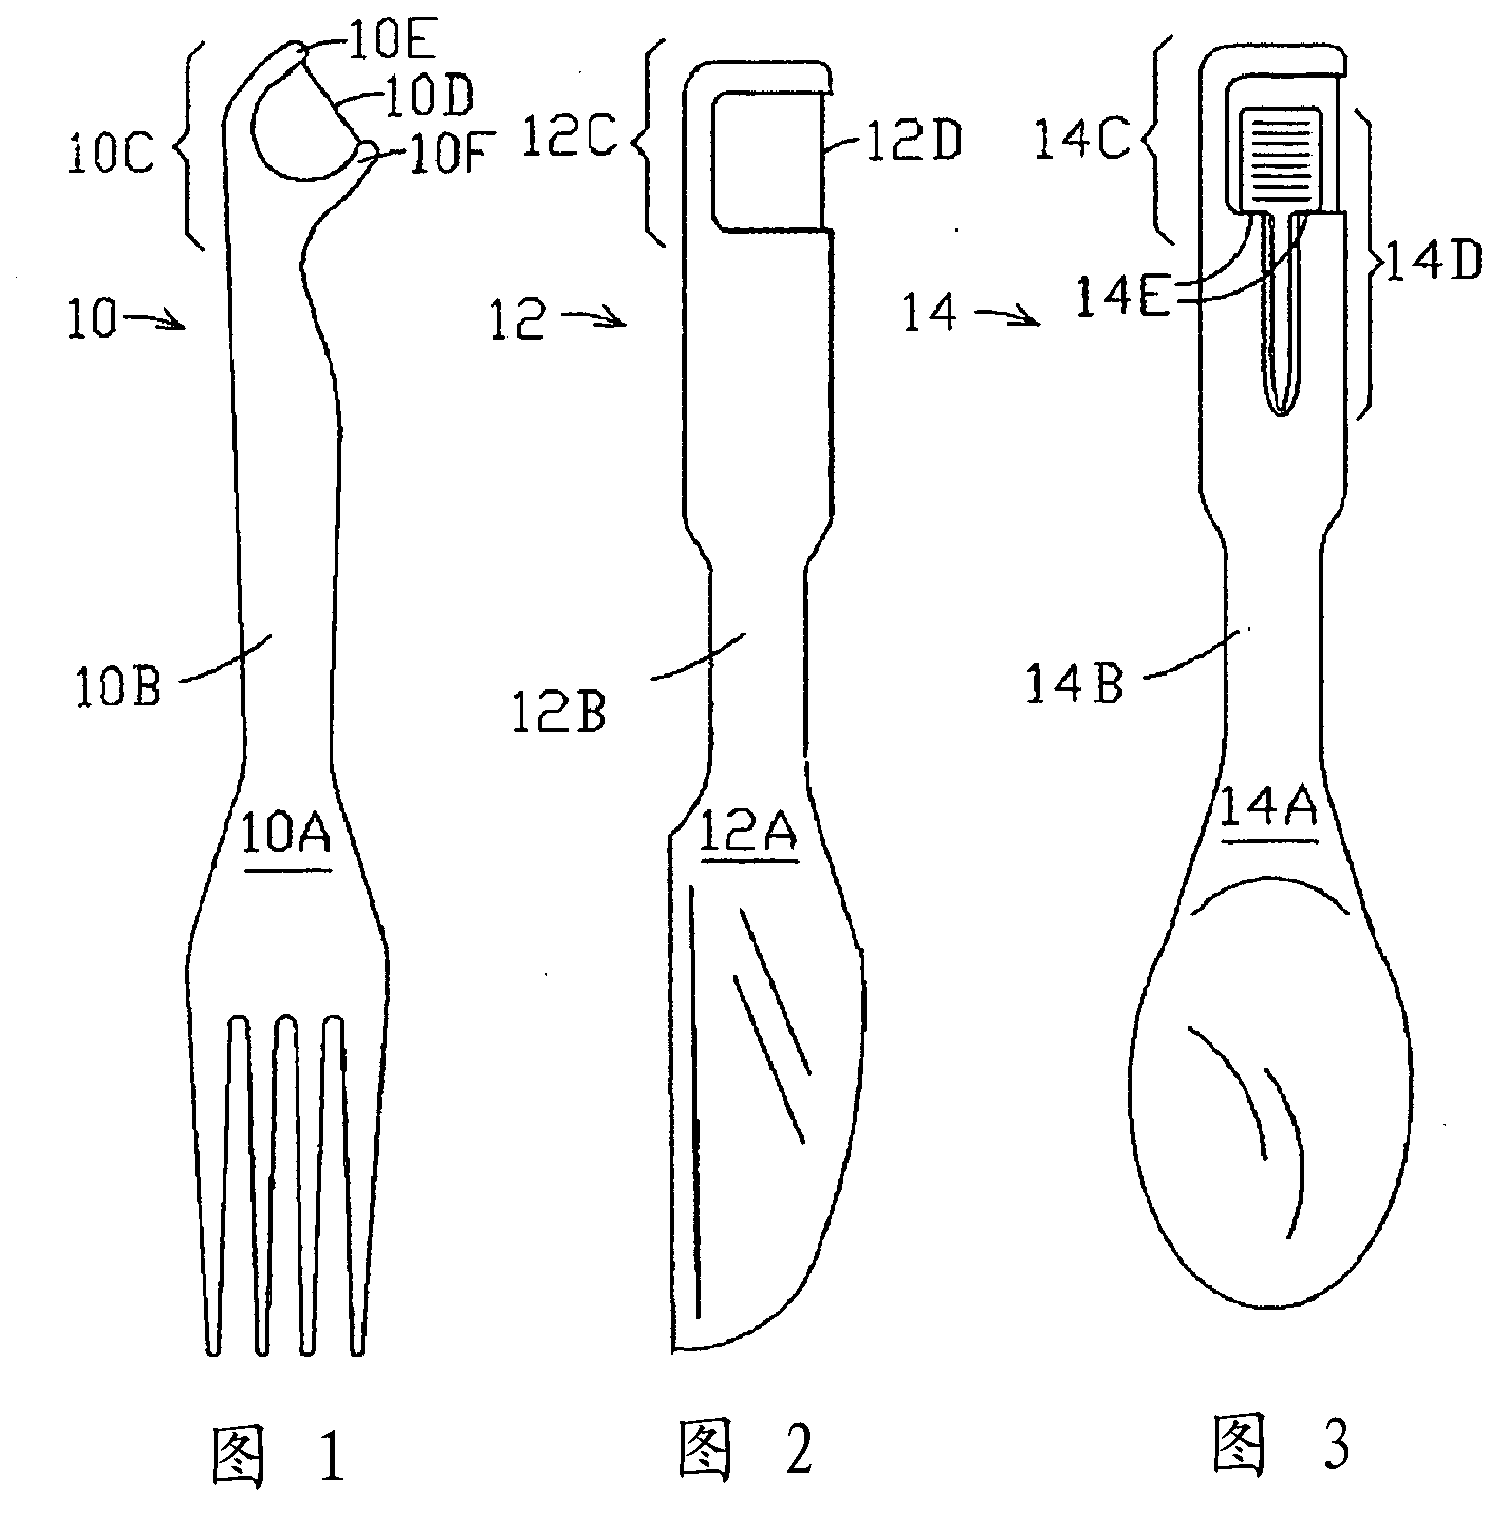 Eating utensil incorporating oral hygienic device